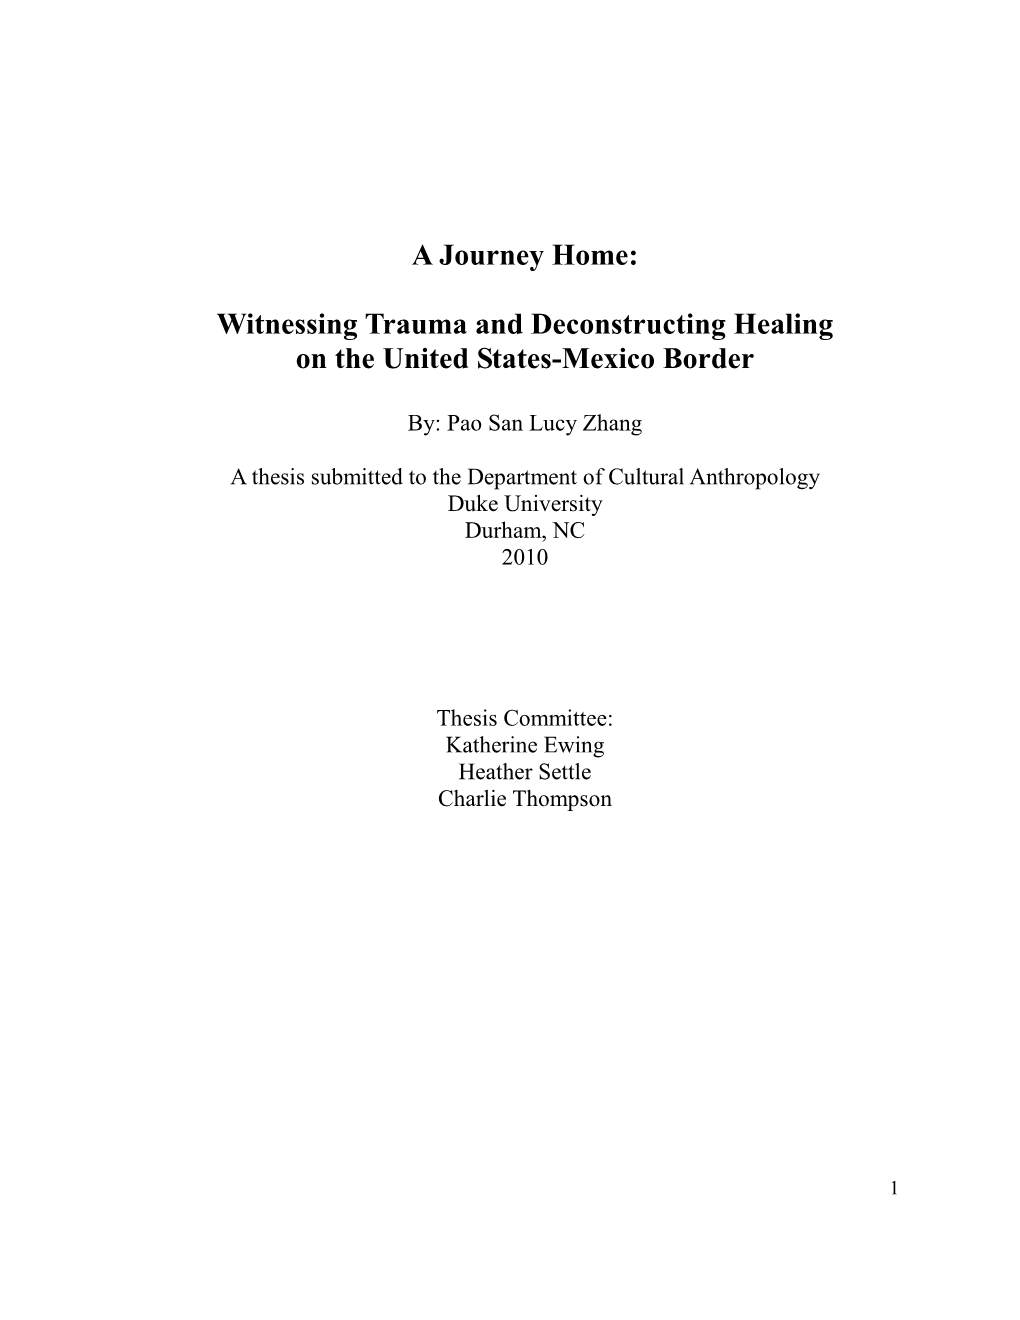 A Journey Home: Witnessing Trauma and Deconstructing Healing on The